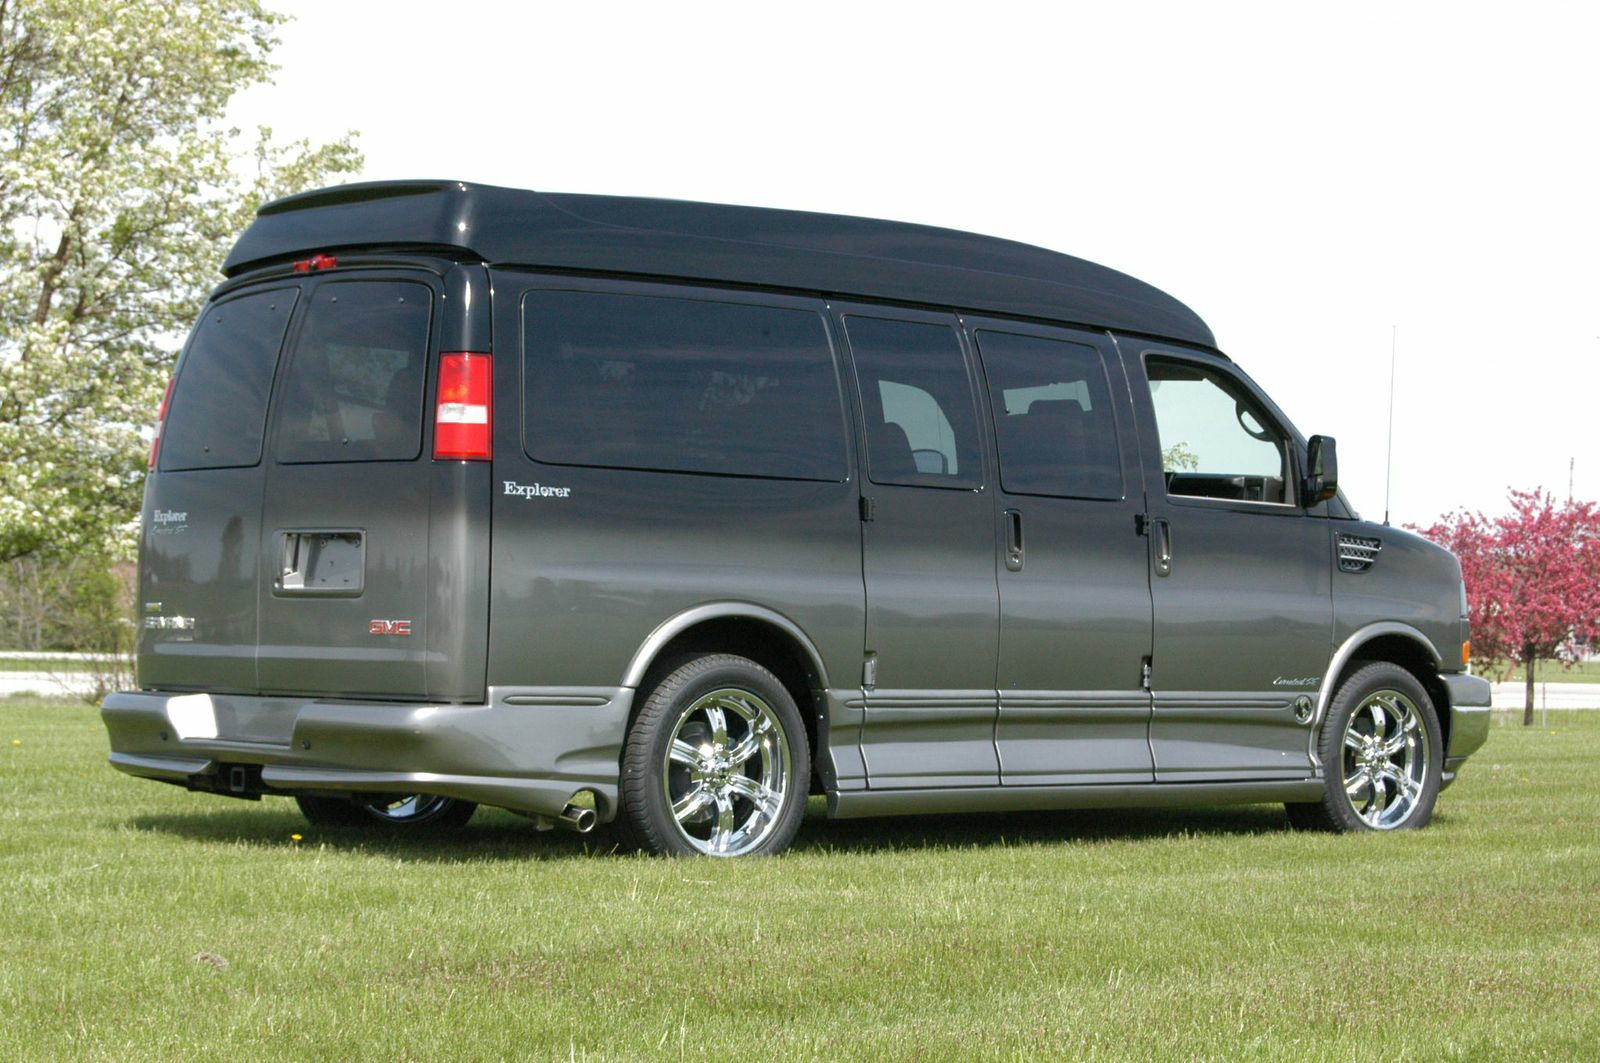 GMC Explorer Vans for Sale in TROY, MO